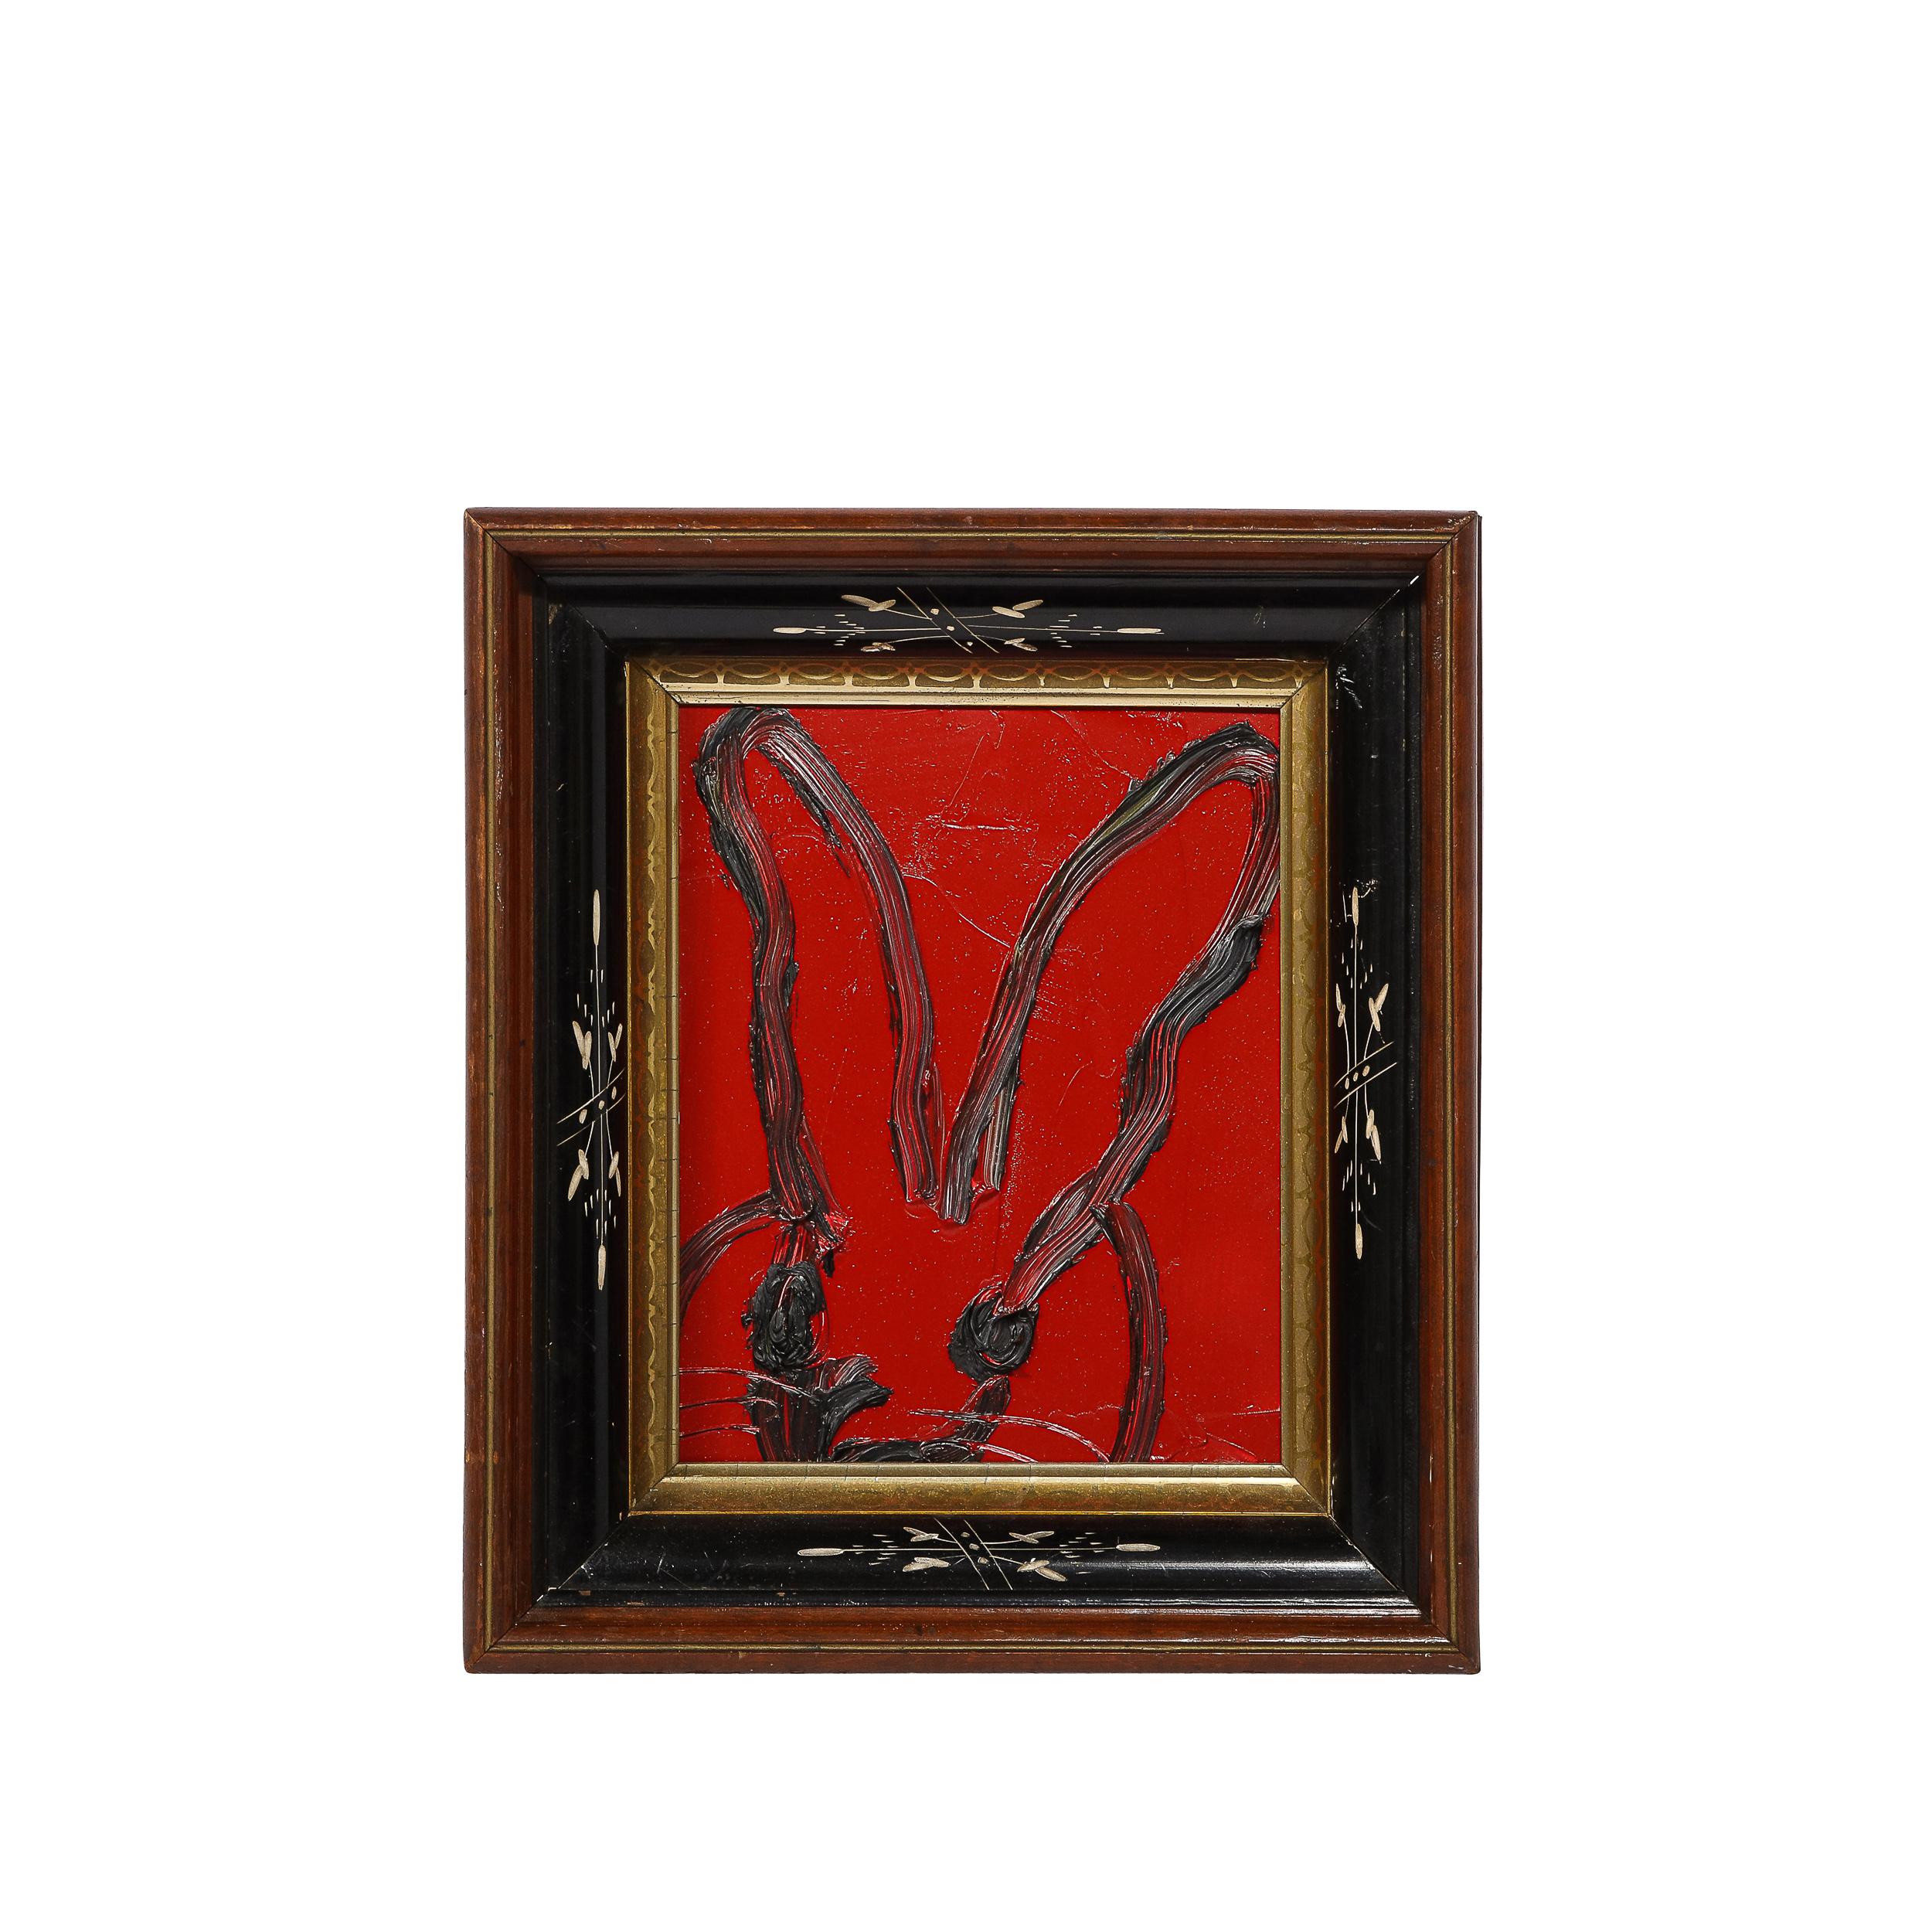 This sophisticated modern acrylic painting was realized by the esteemed contemporary painter, Hunt Slonem in 2018. It presents a stylized bunny rabbit, rendered with loose and expressive brush strokes in grisaille paint in profile against a ruby red